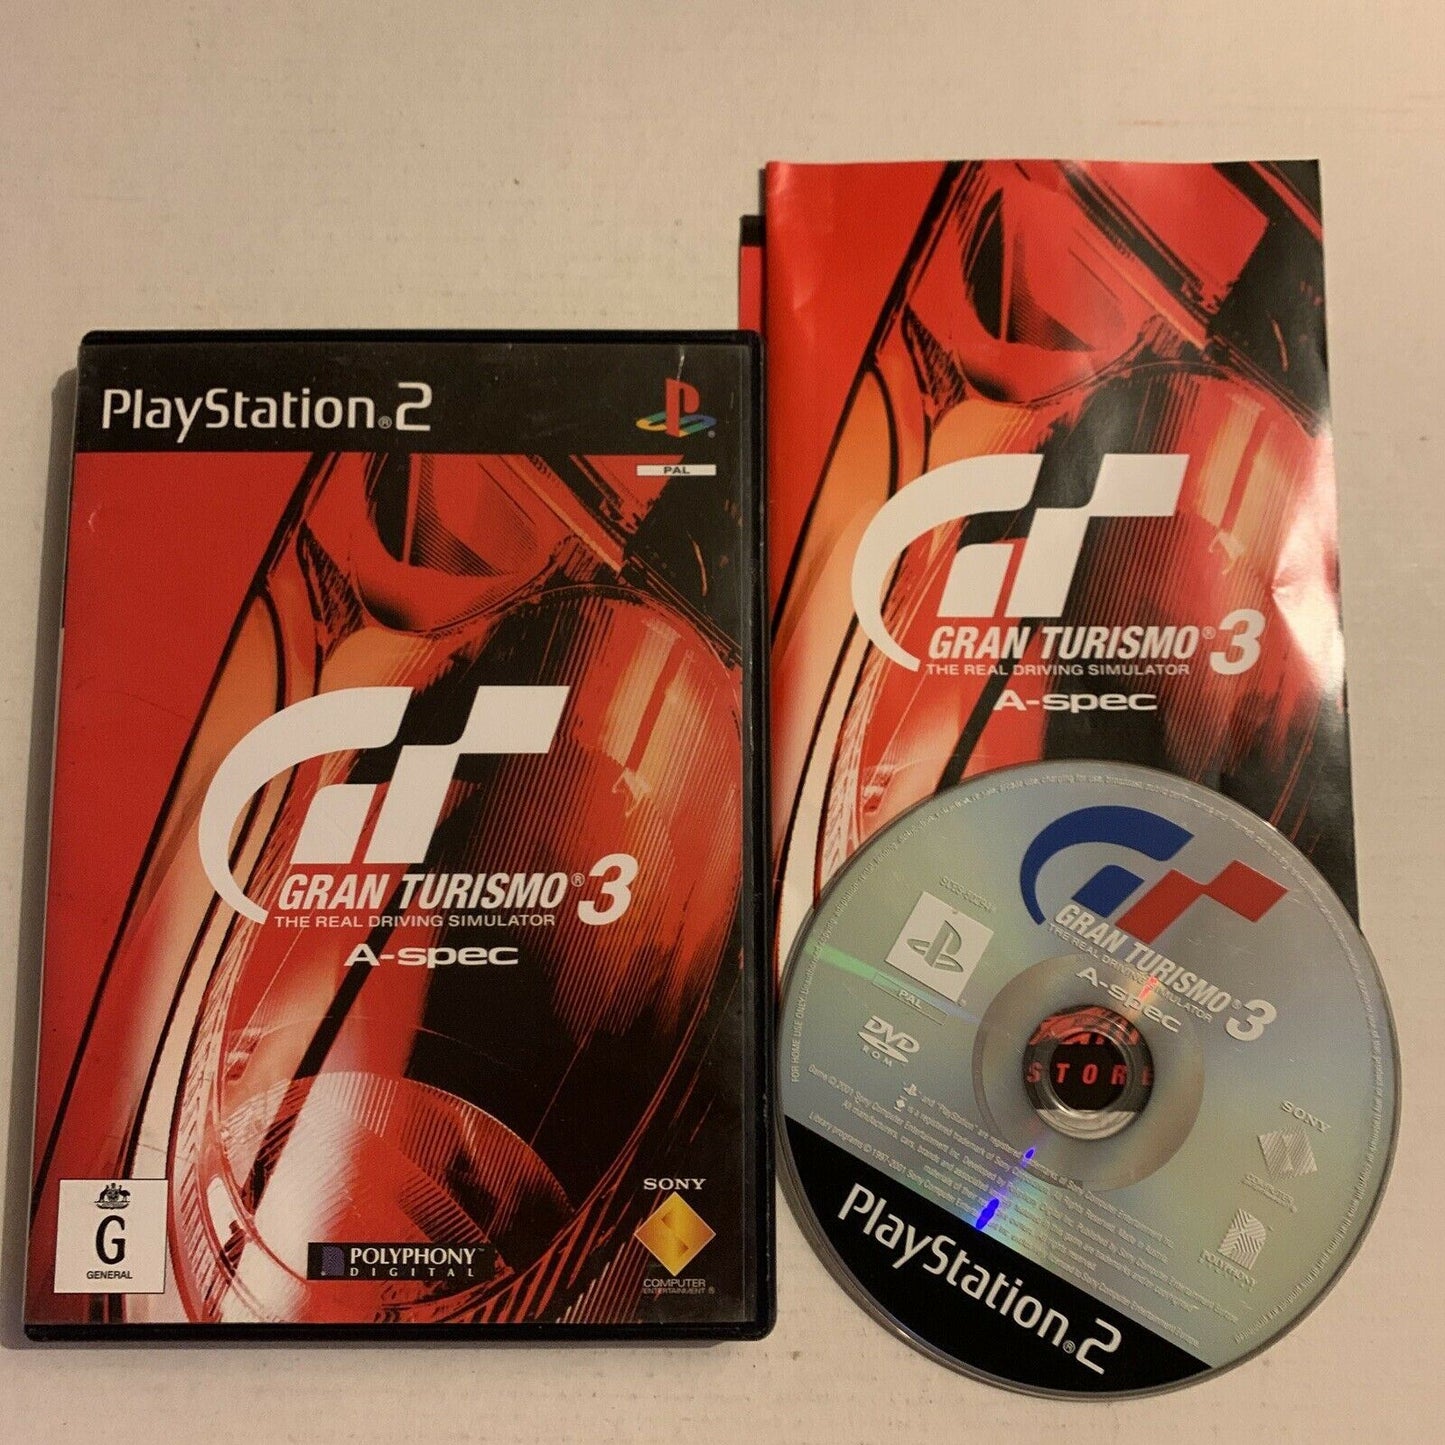 Gran Turismo 3: A -Spec Platinum - PS2 Playstation 2 PAL Game with Manual